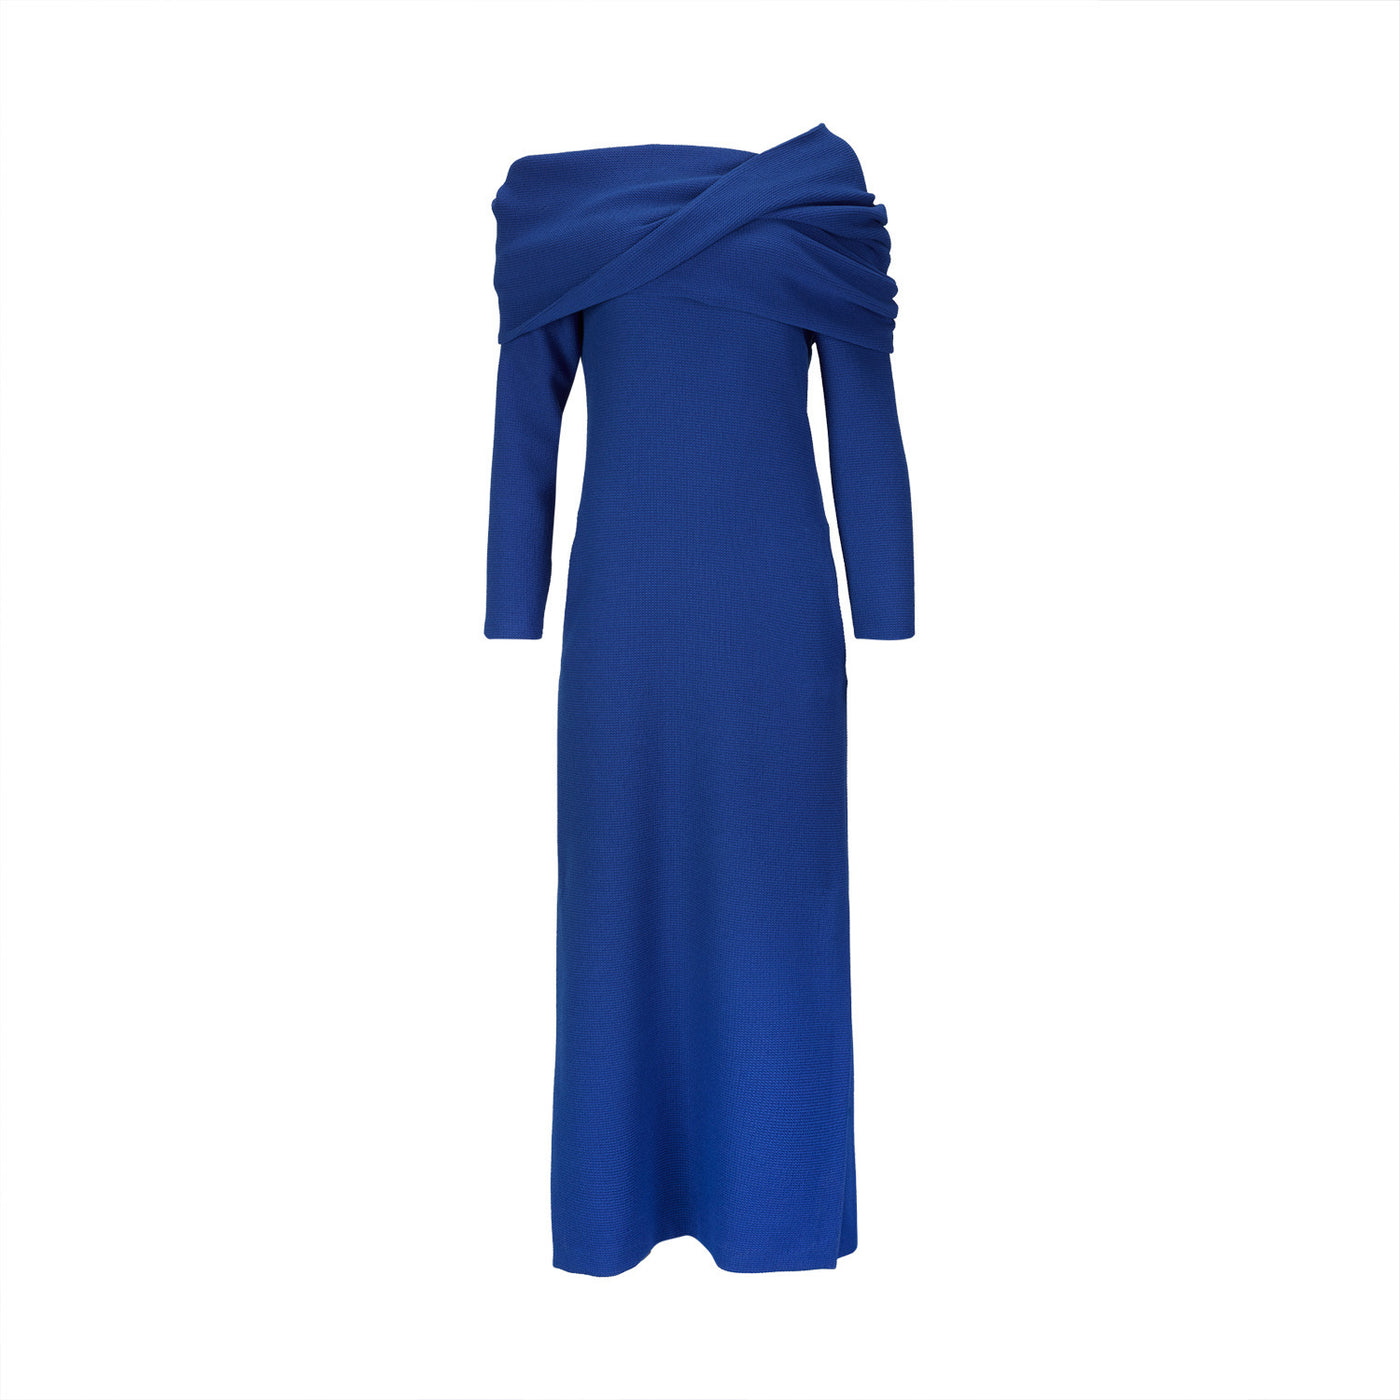 Blue Dress with Deconstructed Cape